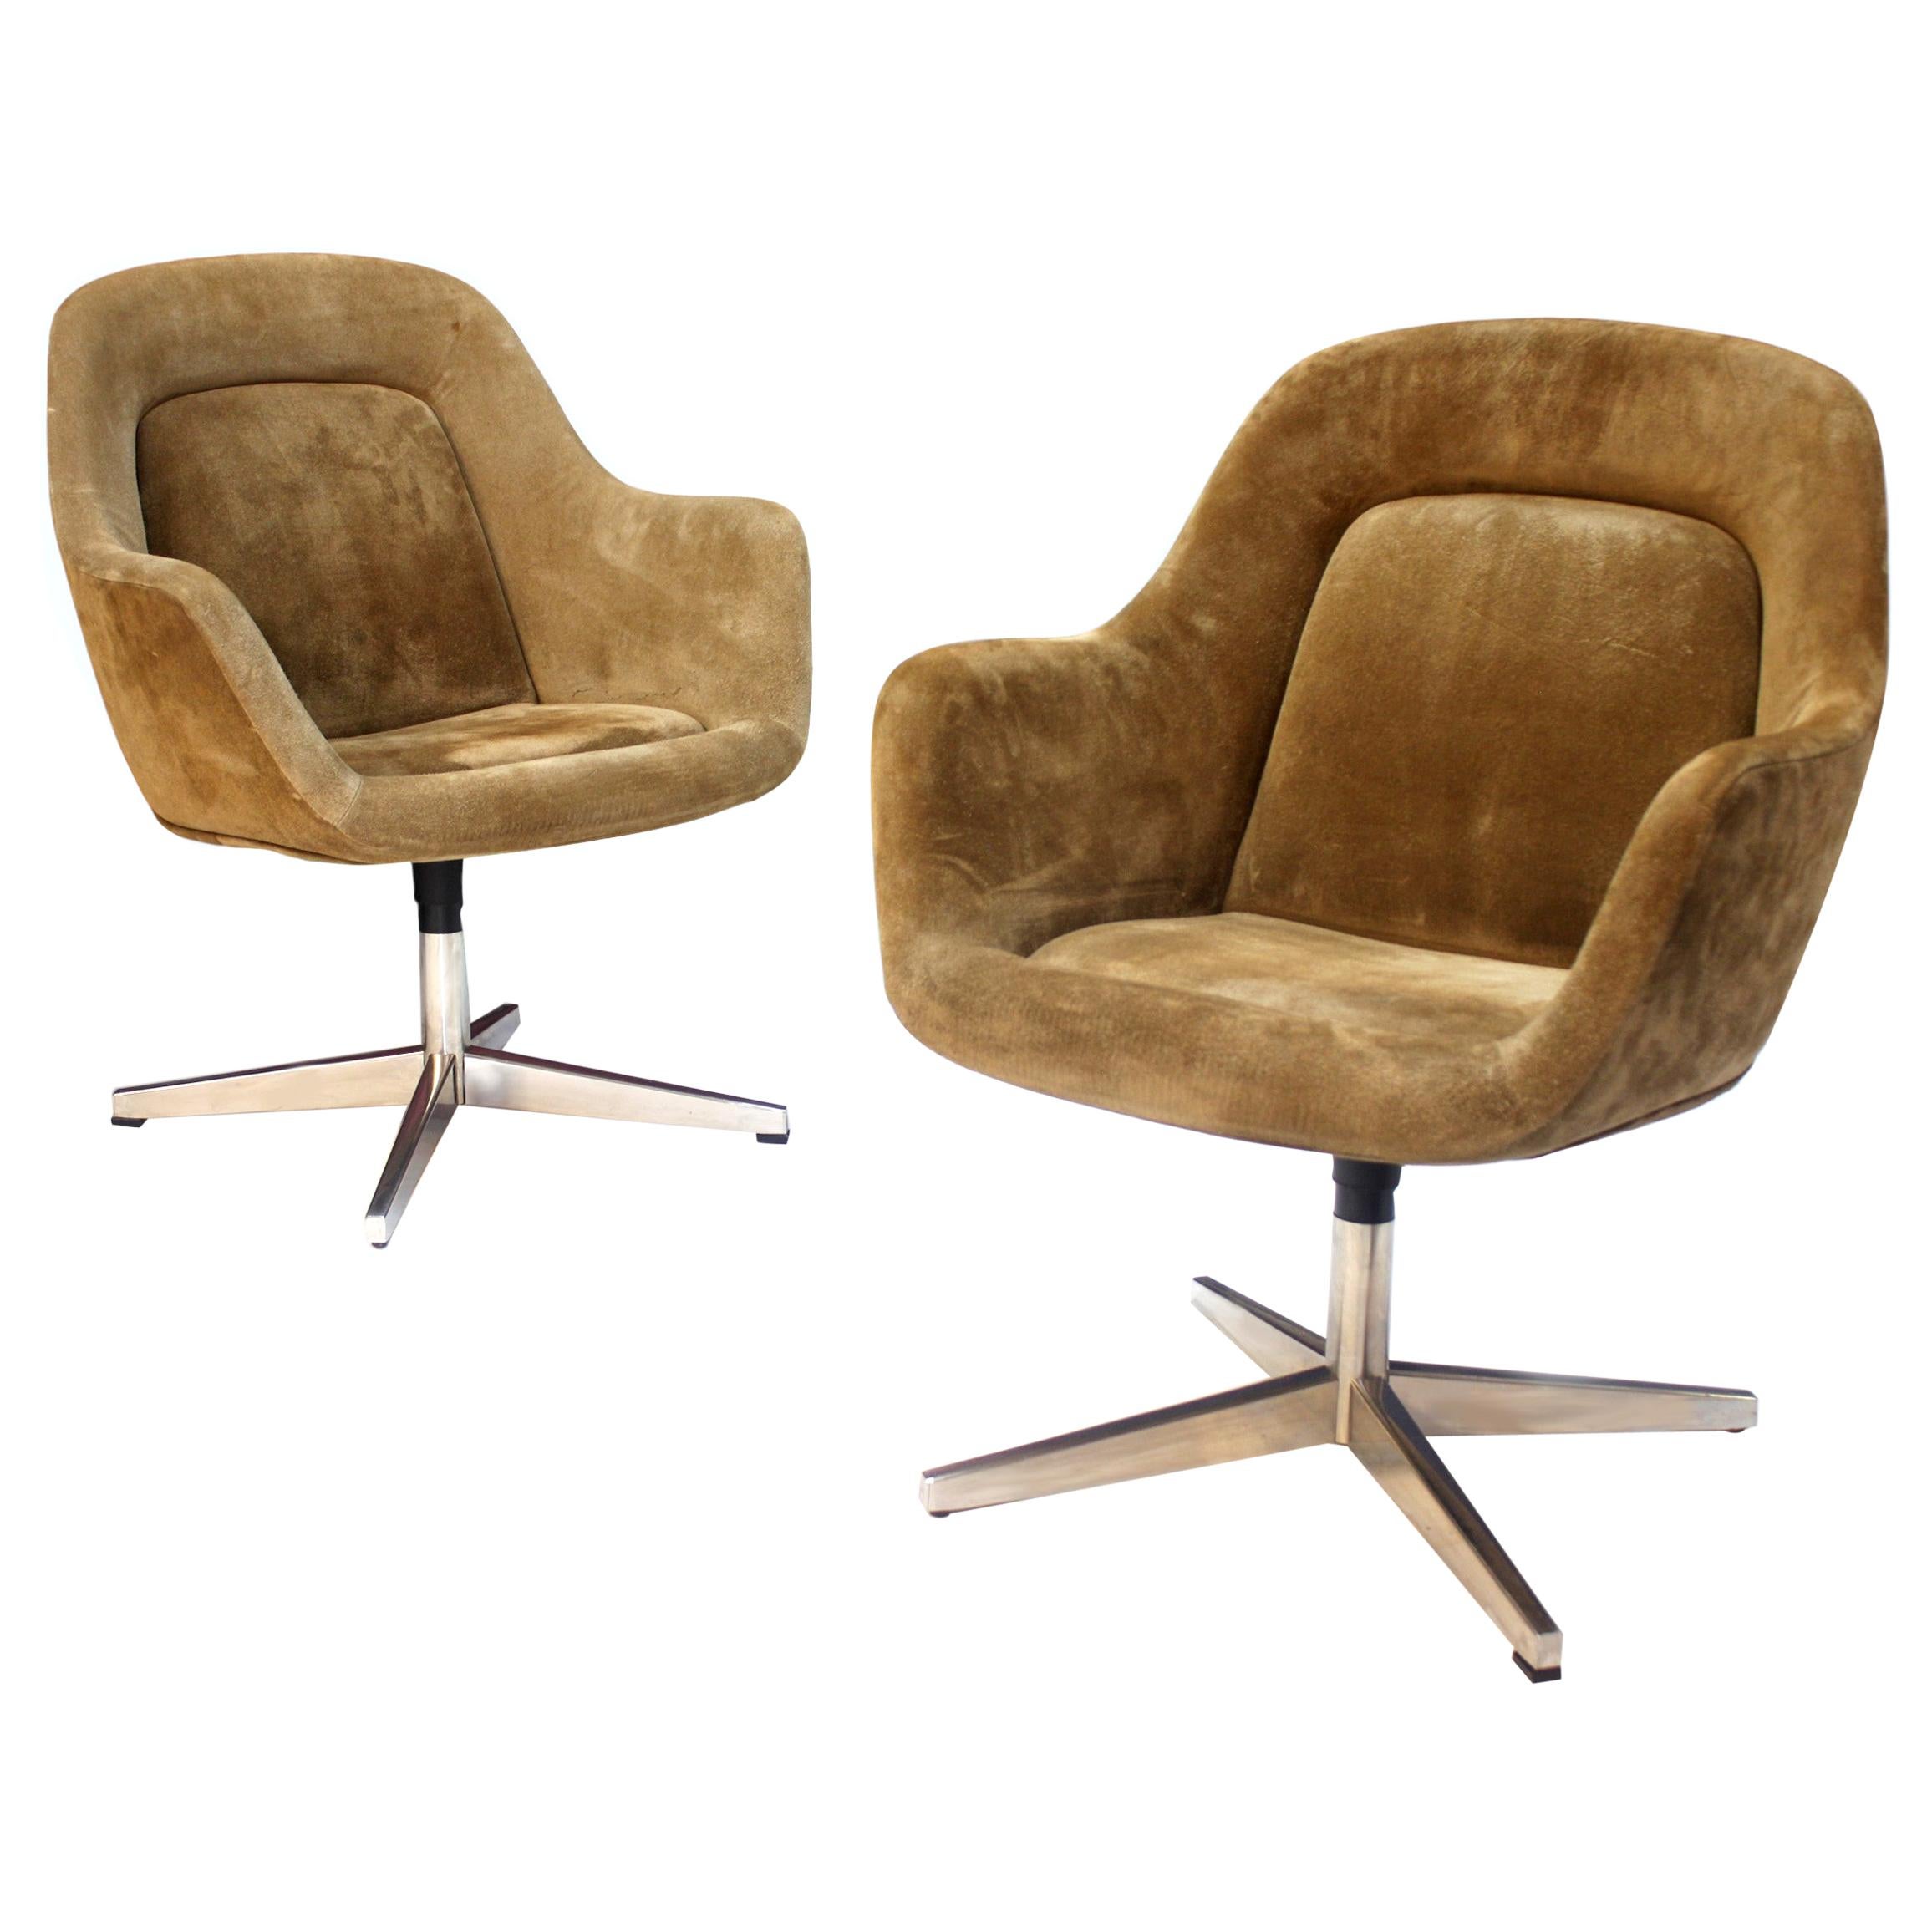 Pair of Mid-Century Modern Suede Side / Guest Chairs by Max Pearson for Knoll